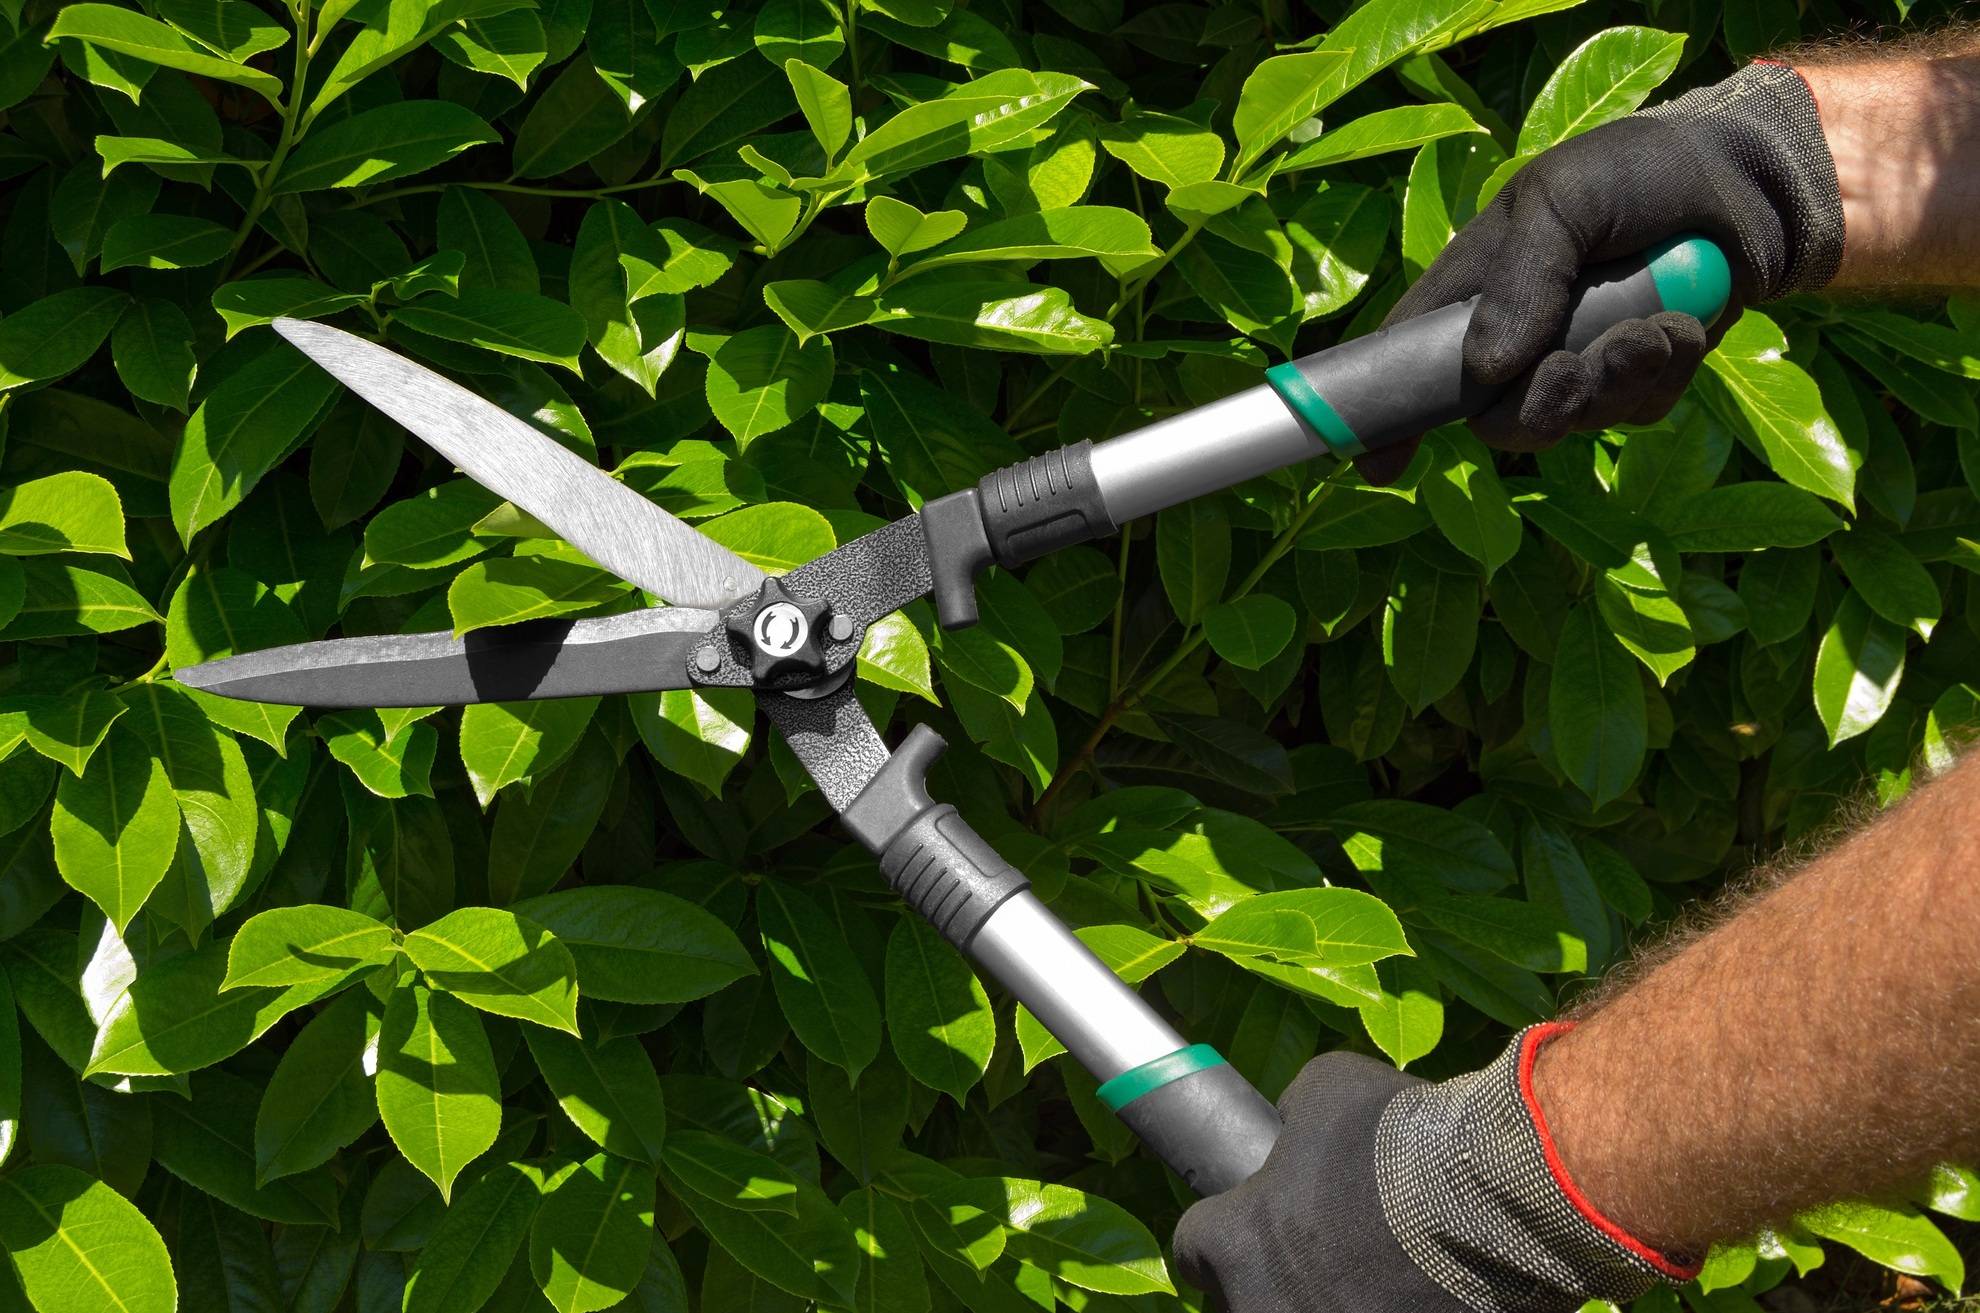  Hands of a professional gardener man with gloves and garden shears cutting a green hedge in the garden 